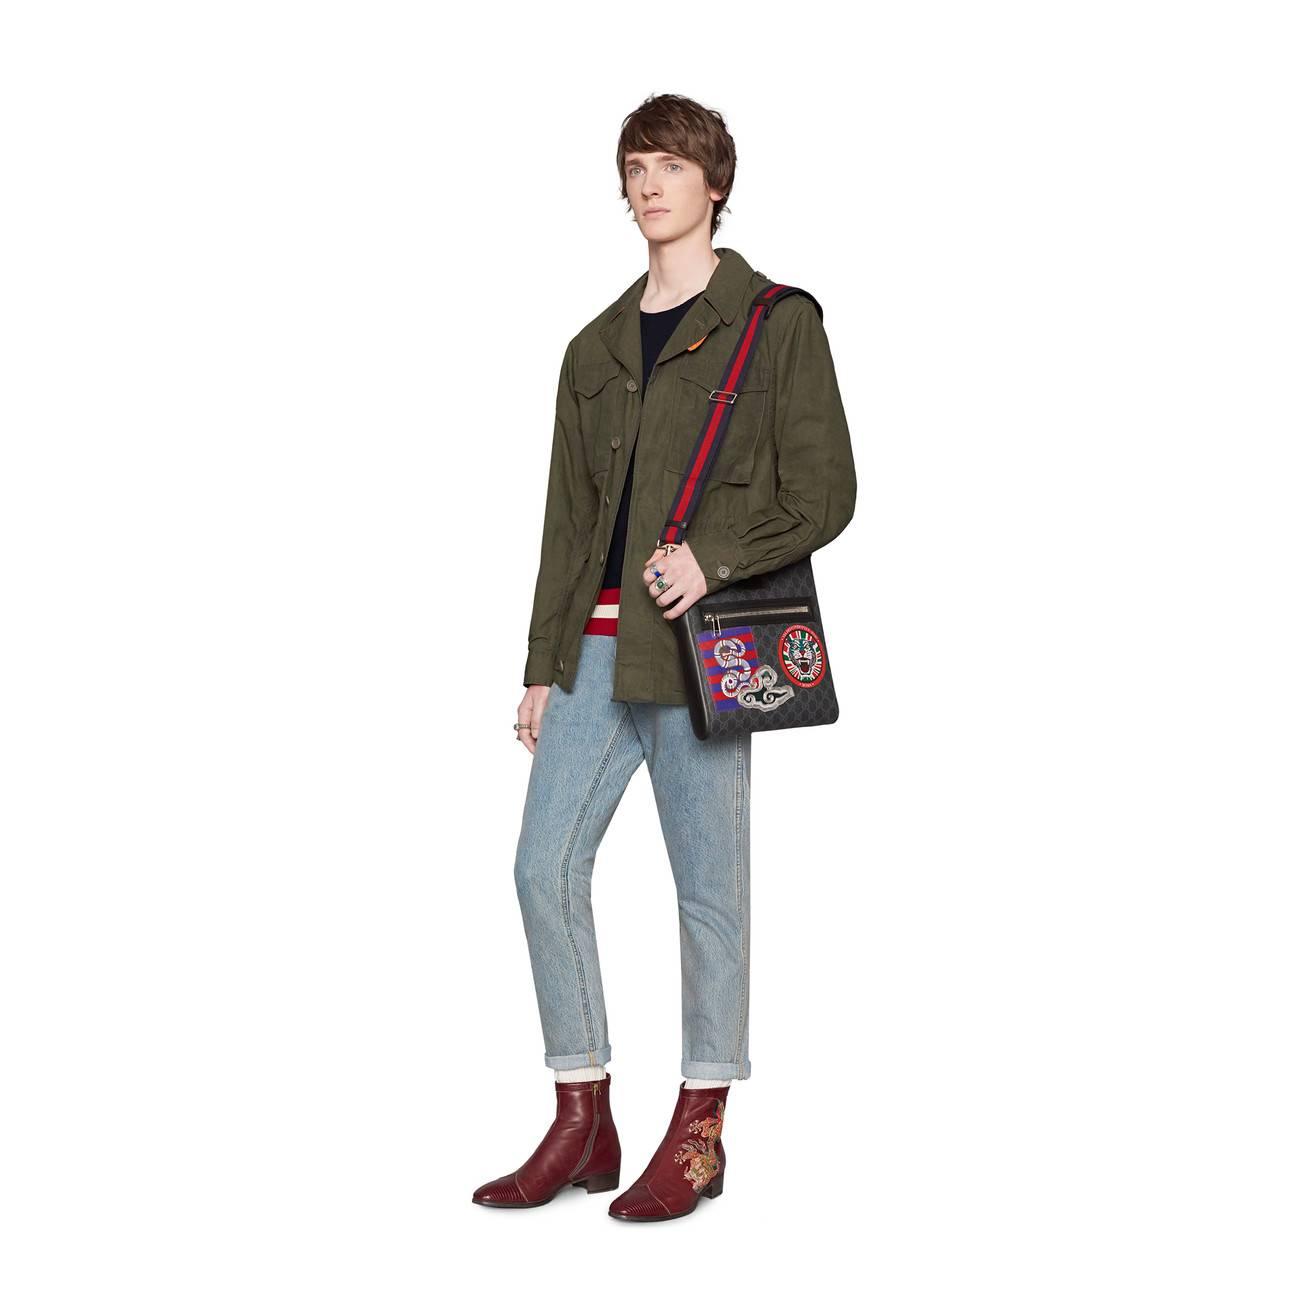 gucci messenger bag outfit